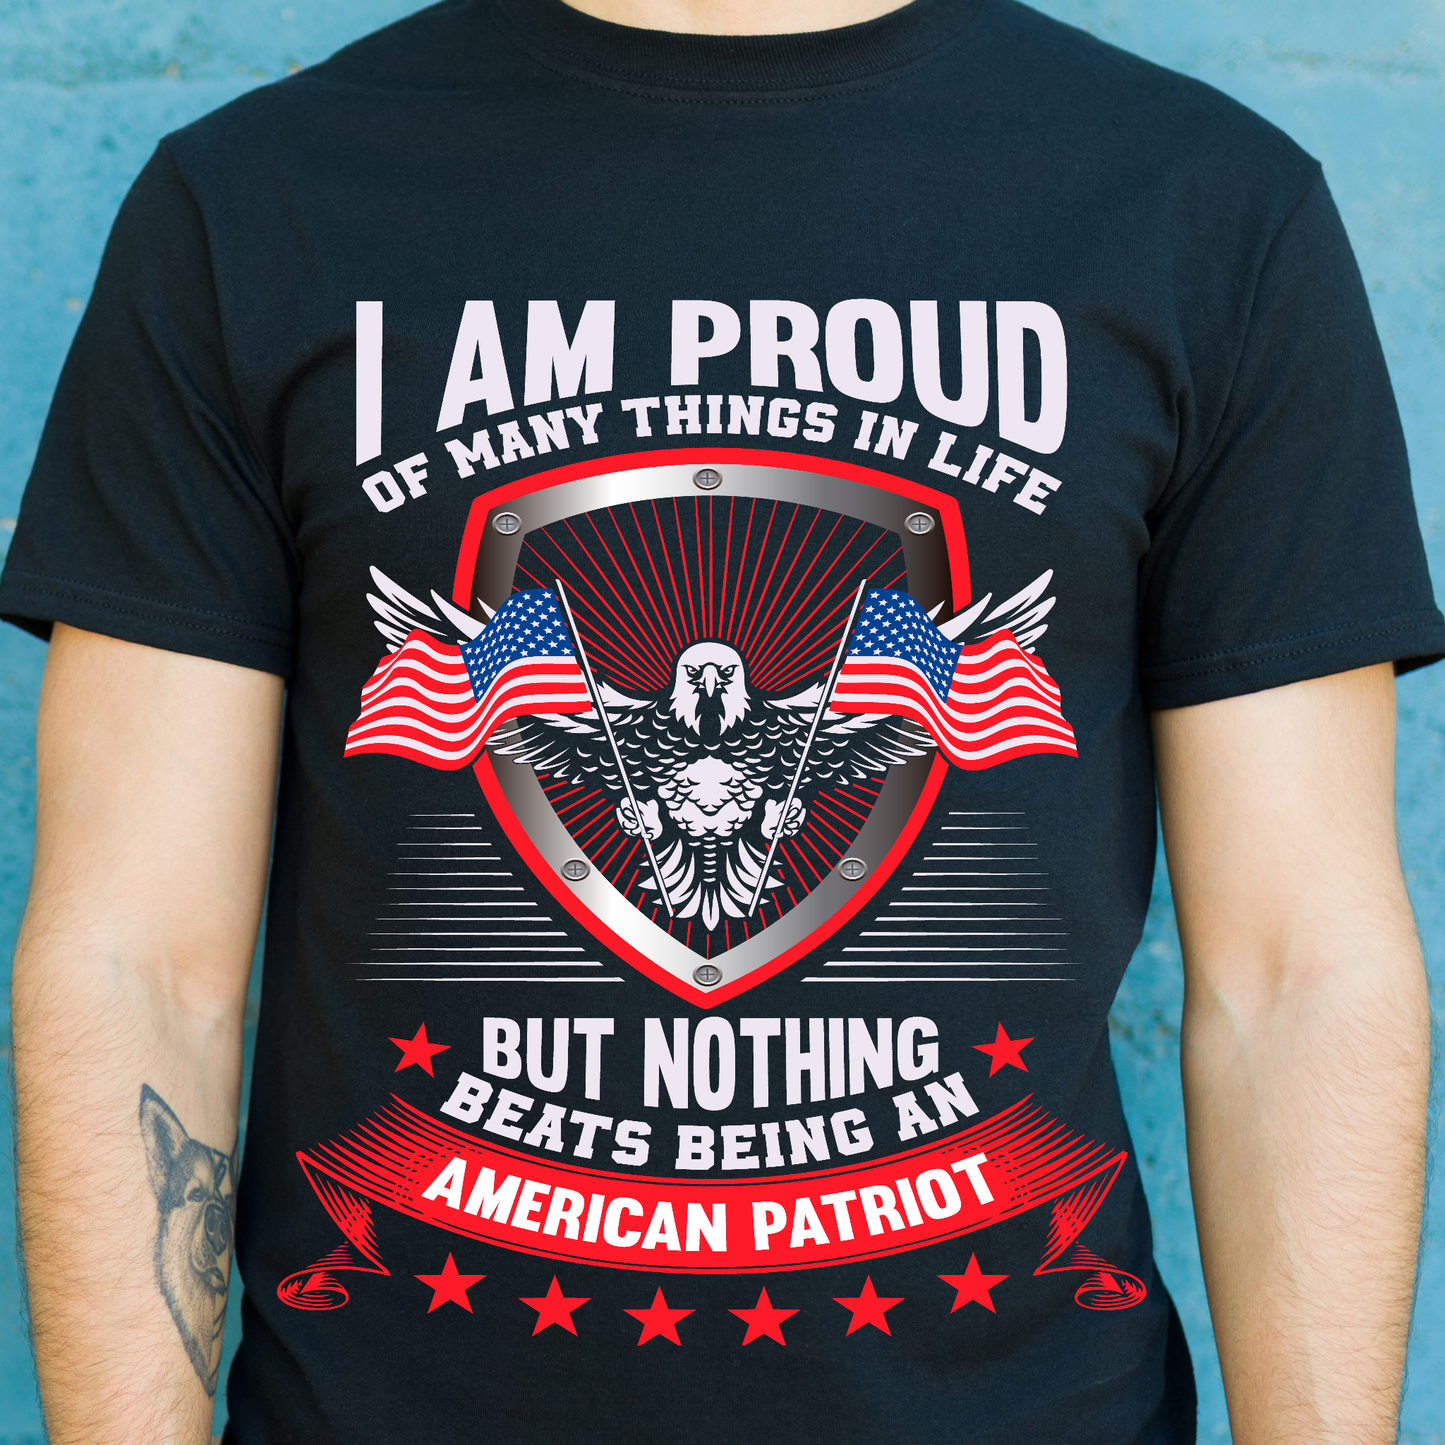 I am proud of many things in life Patriot t-shirt - Premium t-shirt from Lees Krazy Teez - Just $19.95! Shop now at Lees Krazy Teez